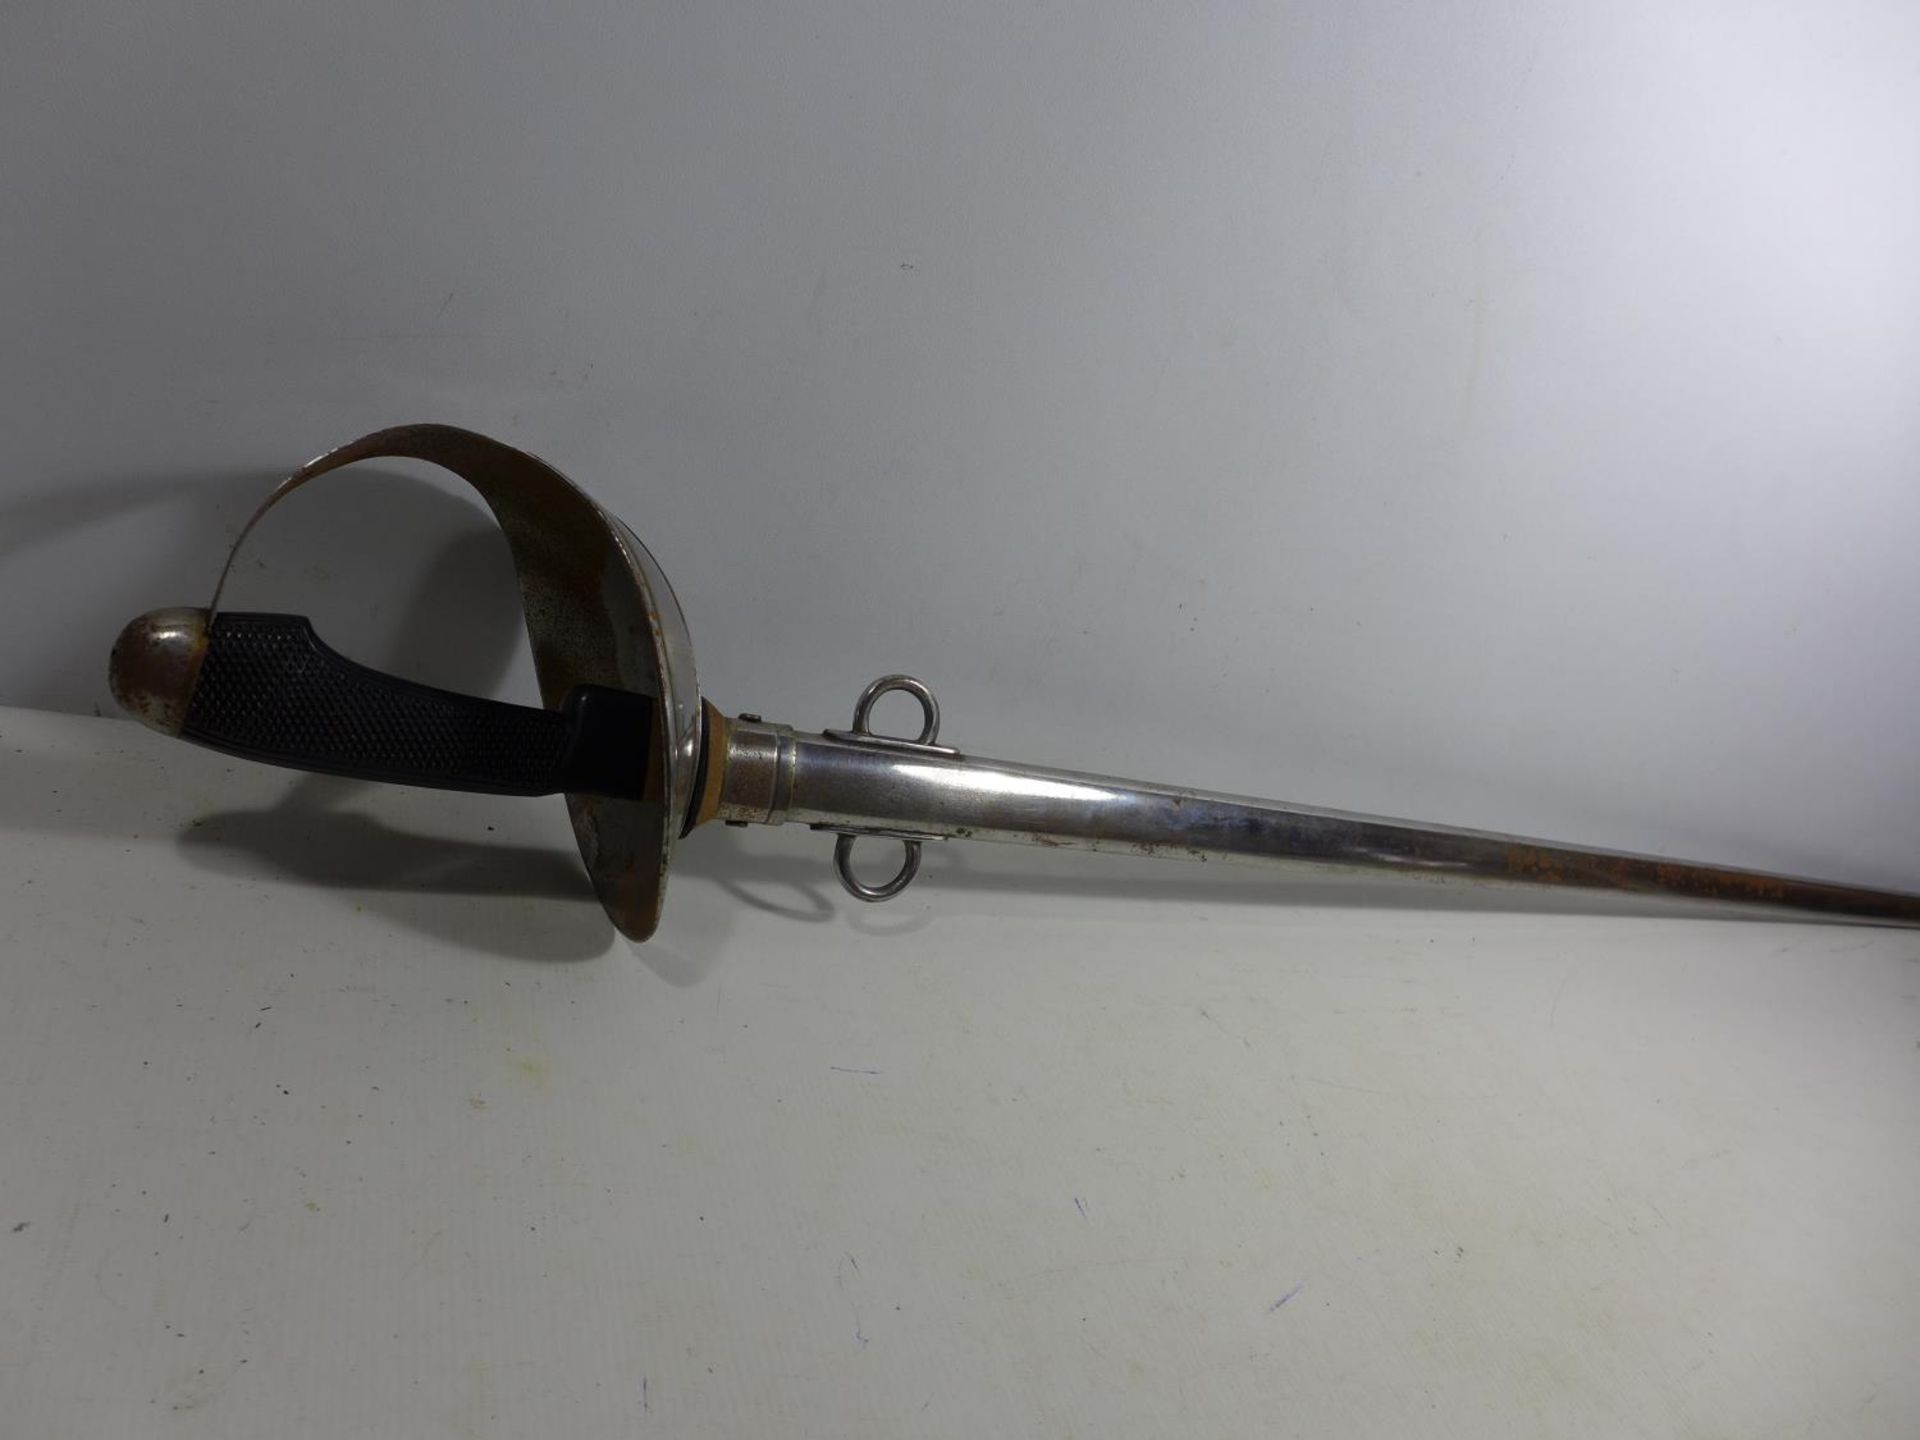 A REPLICA 1908 PATTERN CAVALRY TROOPERS SWORD AND SCABBARD, 89CM BLADE, LENGTH 110CM - Image 9 of 9